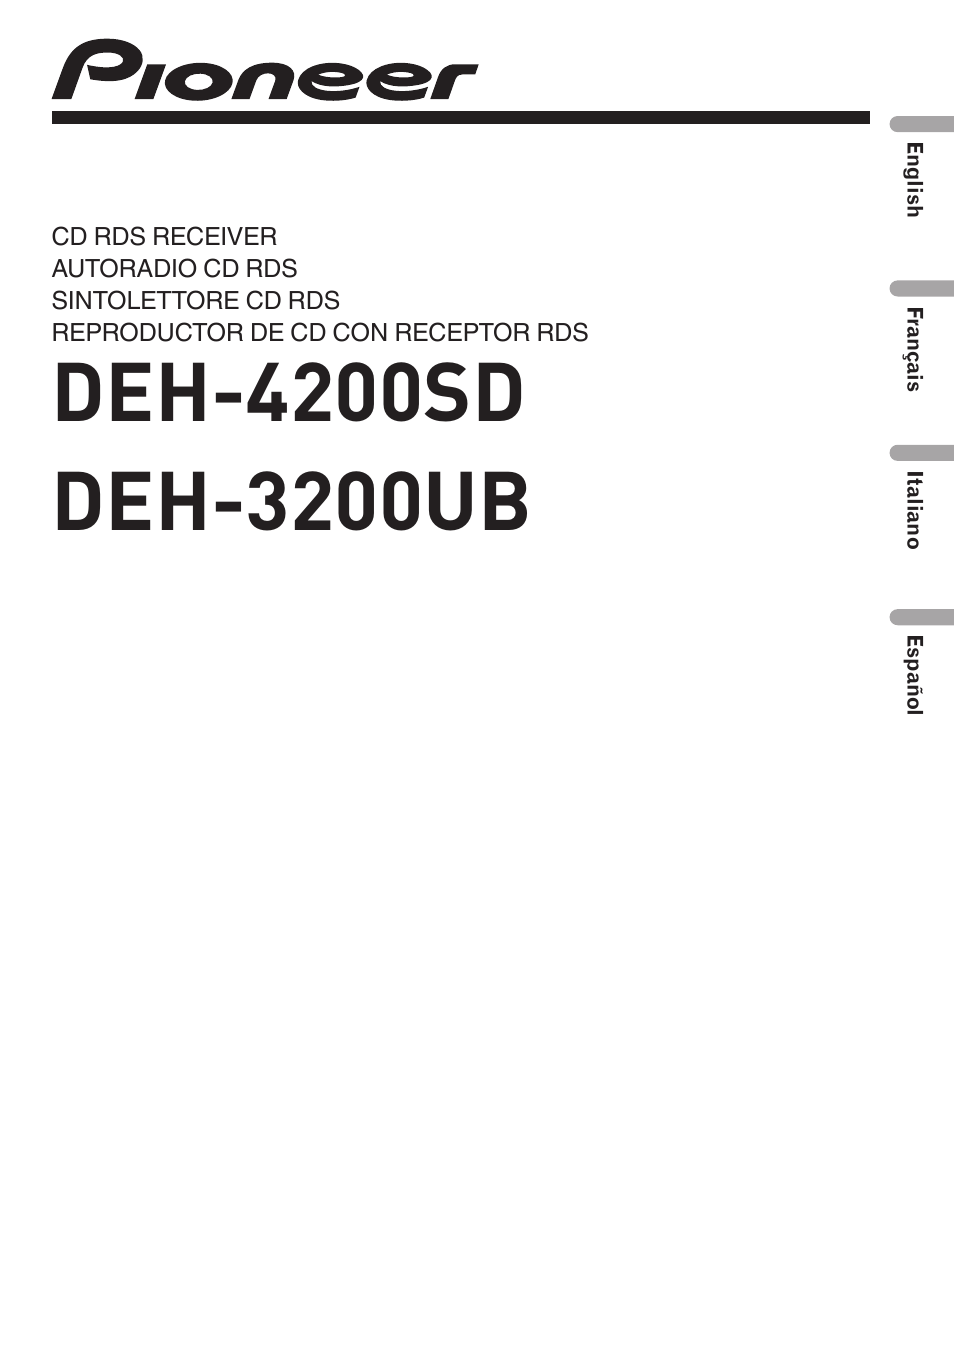 Pioneer DEH-3200UB User Manual | 116 pages | Also for: DEH-4200SD